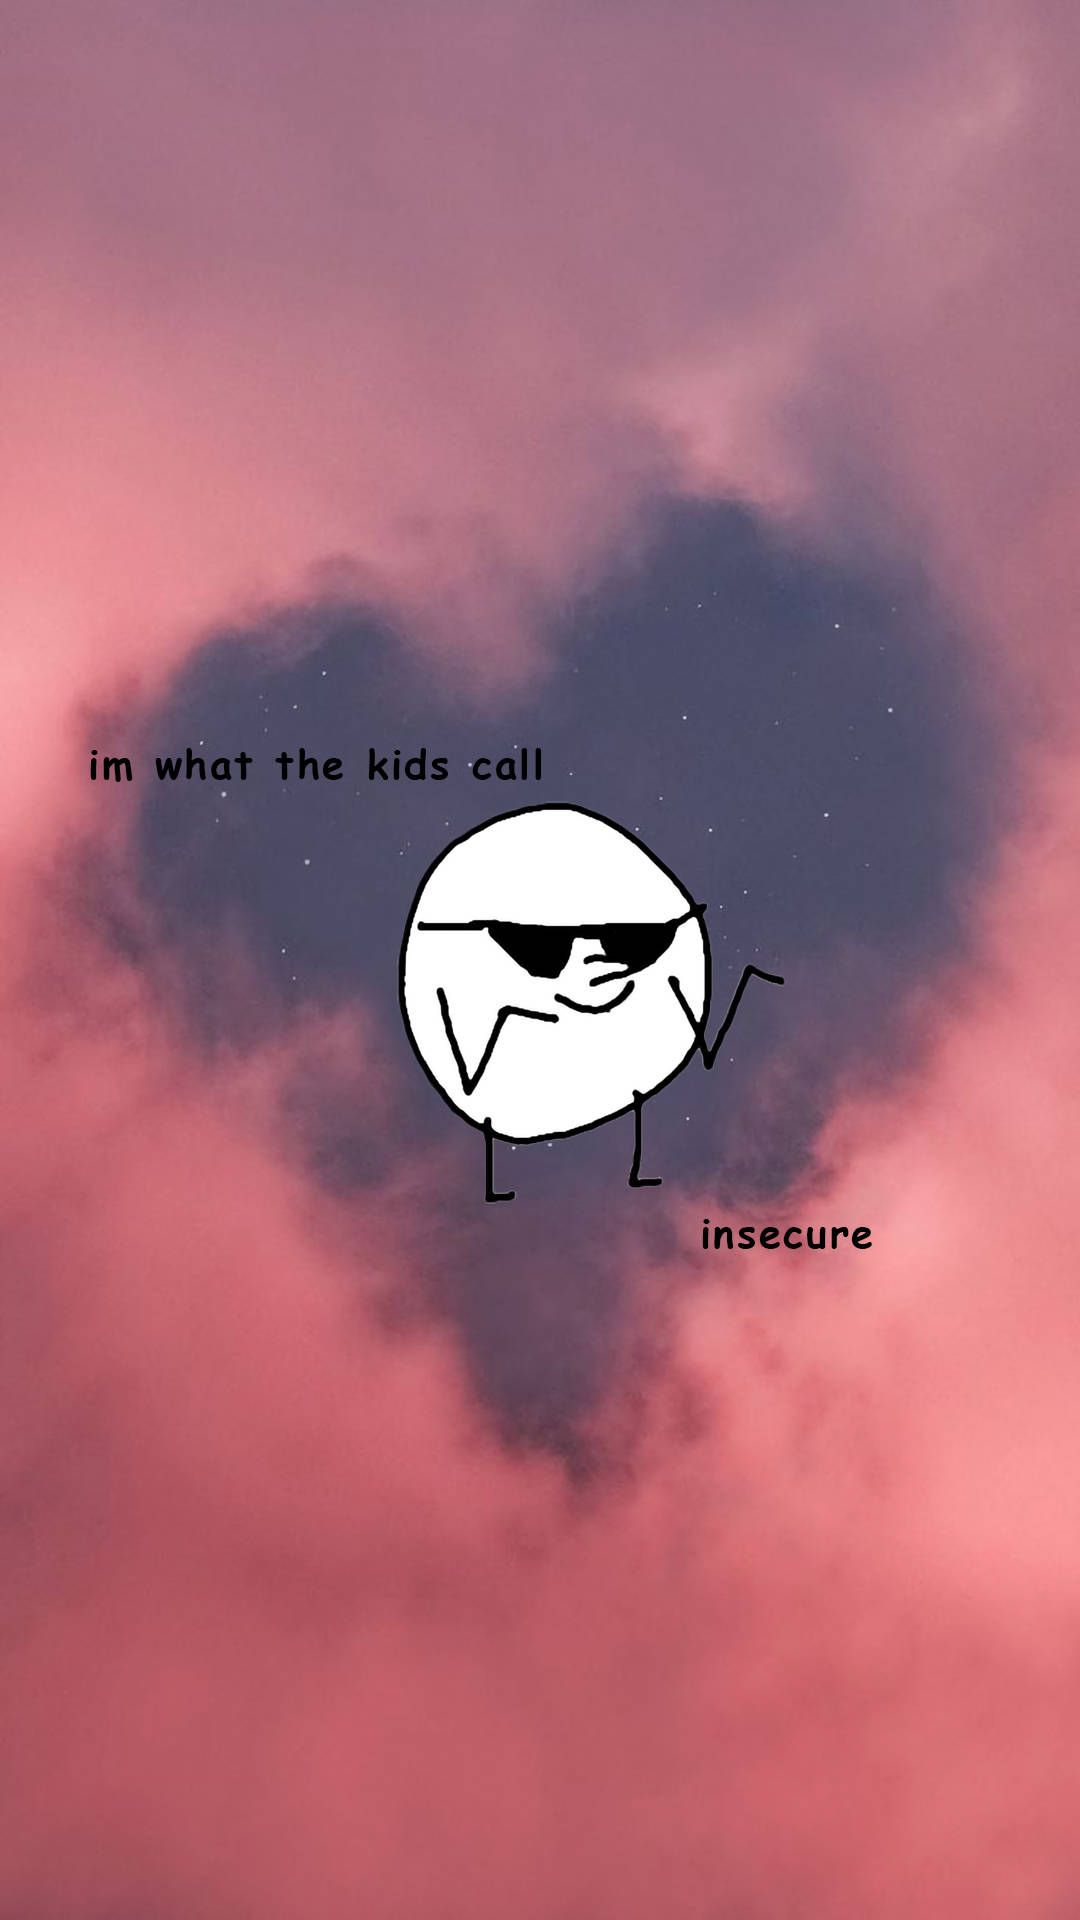 Download Funny Aesthetic Insecure Egg Wallpaper